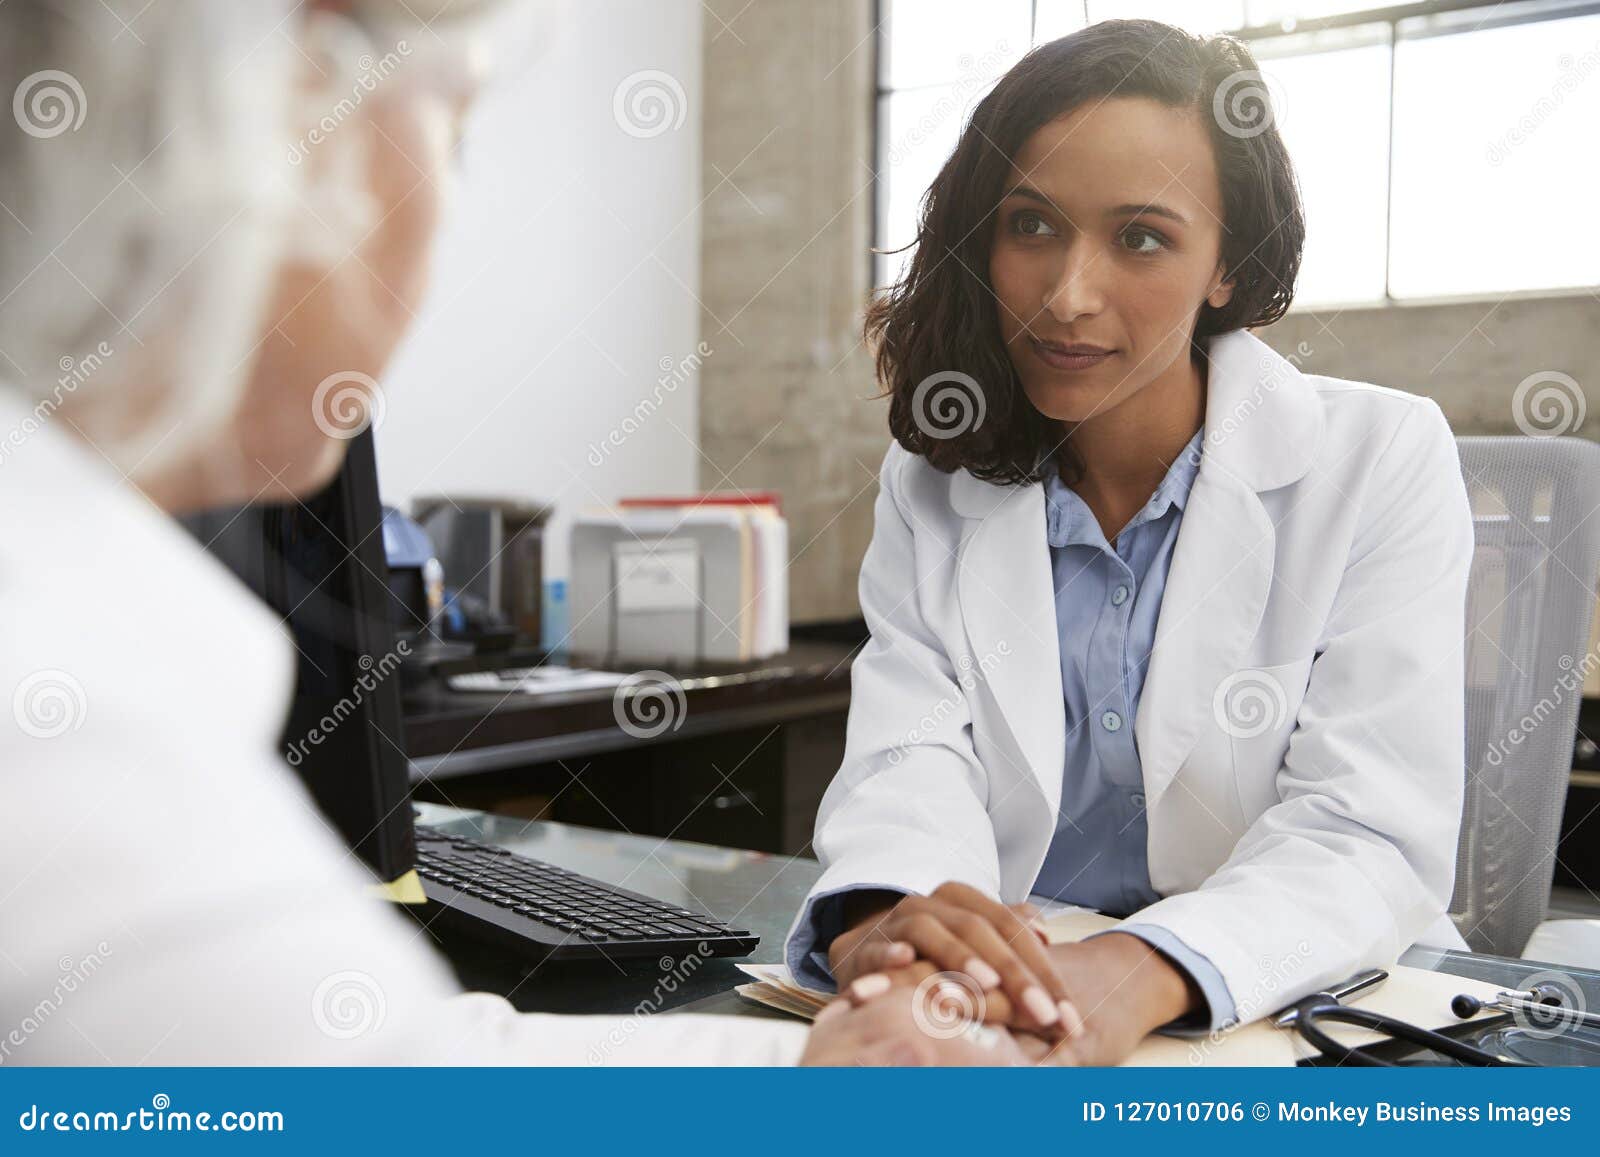 young female doctor in consultation with senior patient